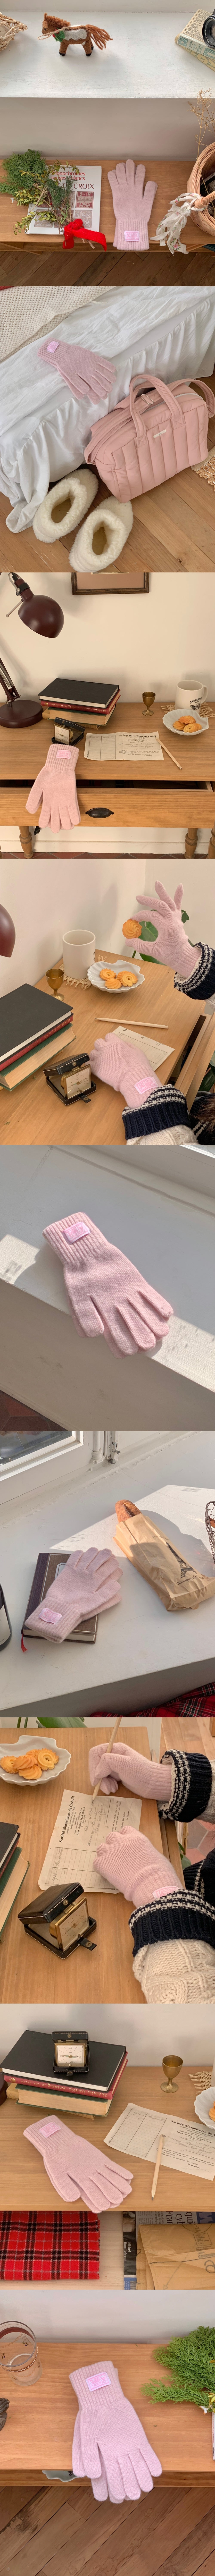 let it snow label gloves (baby pink)